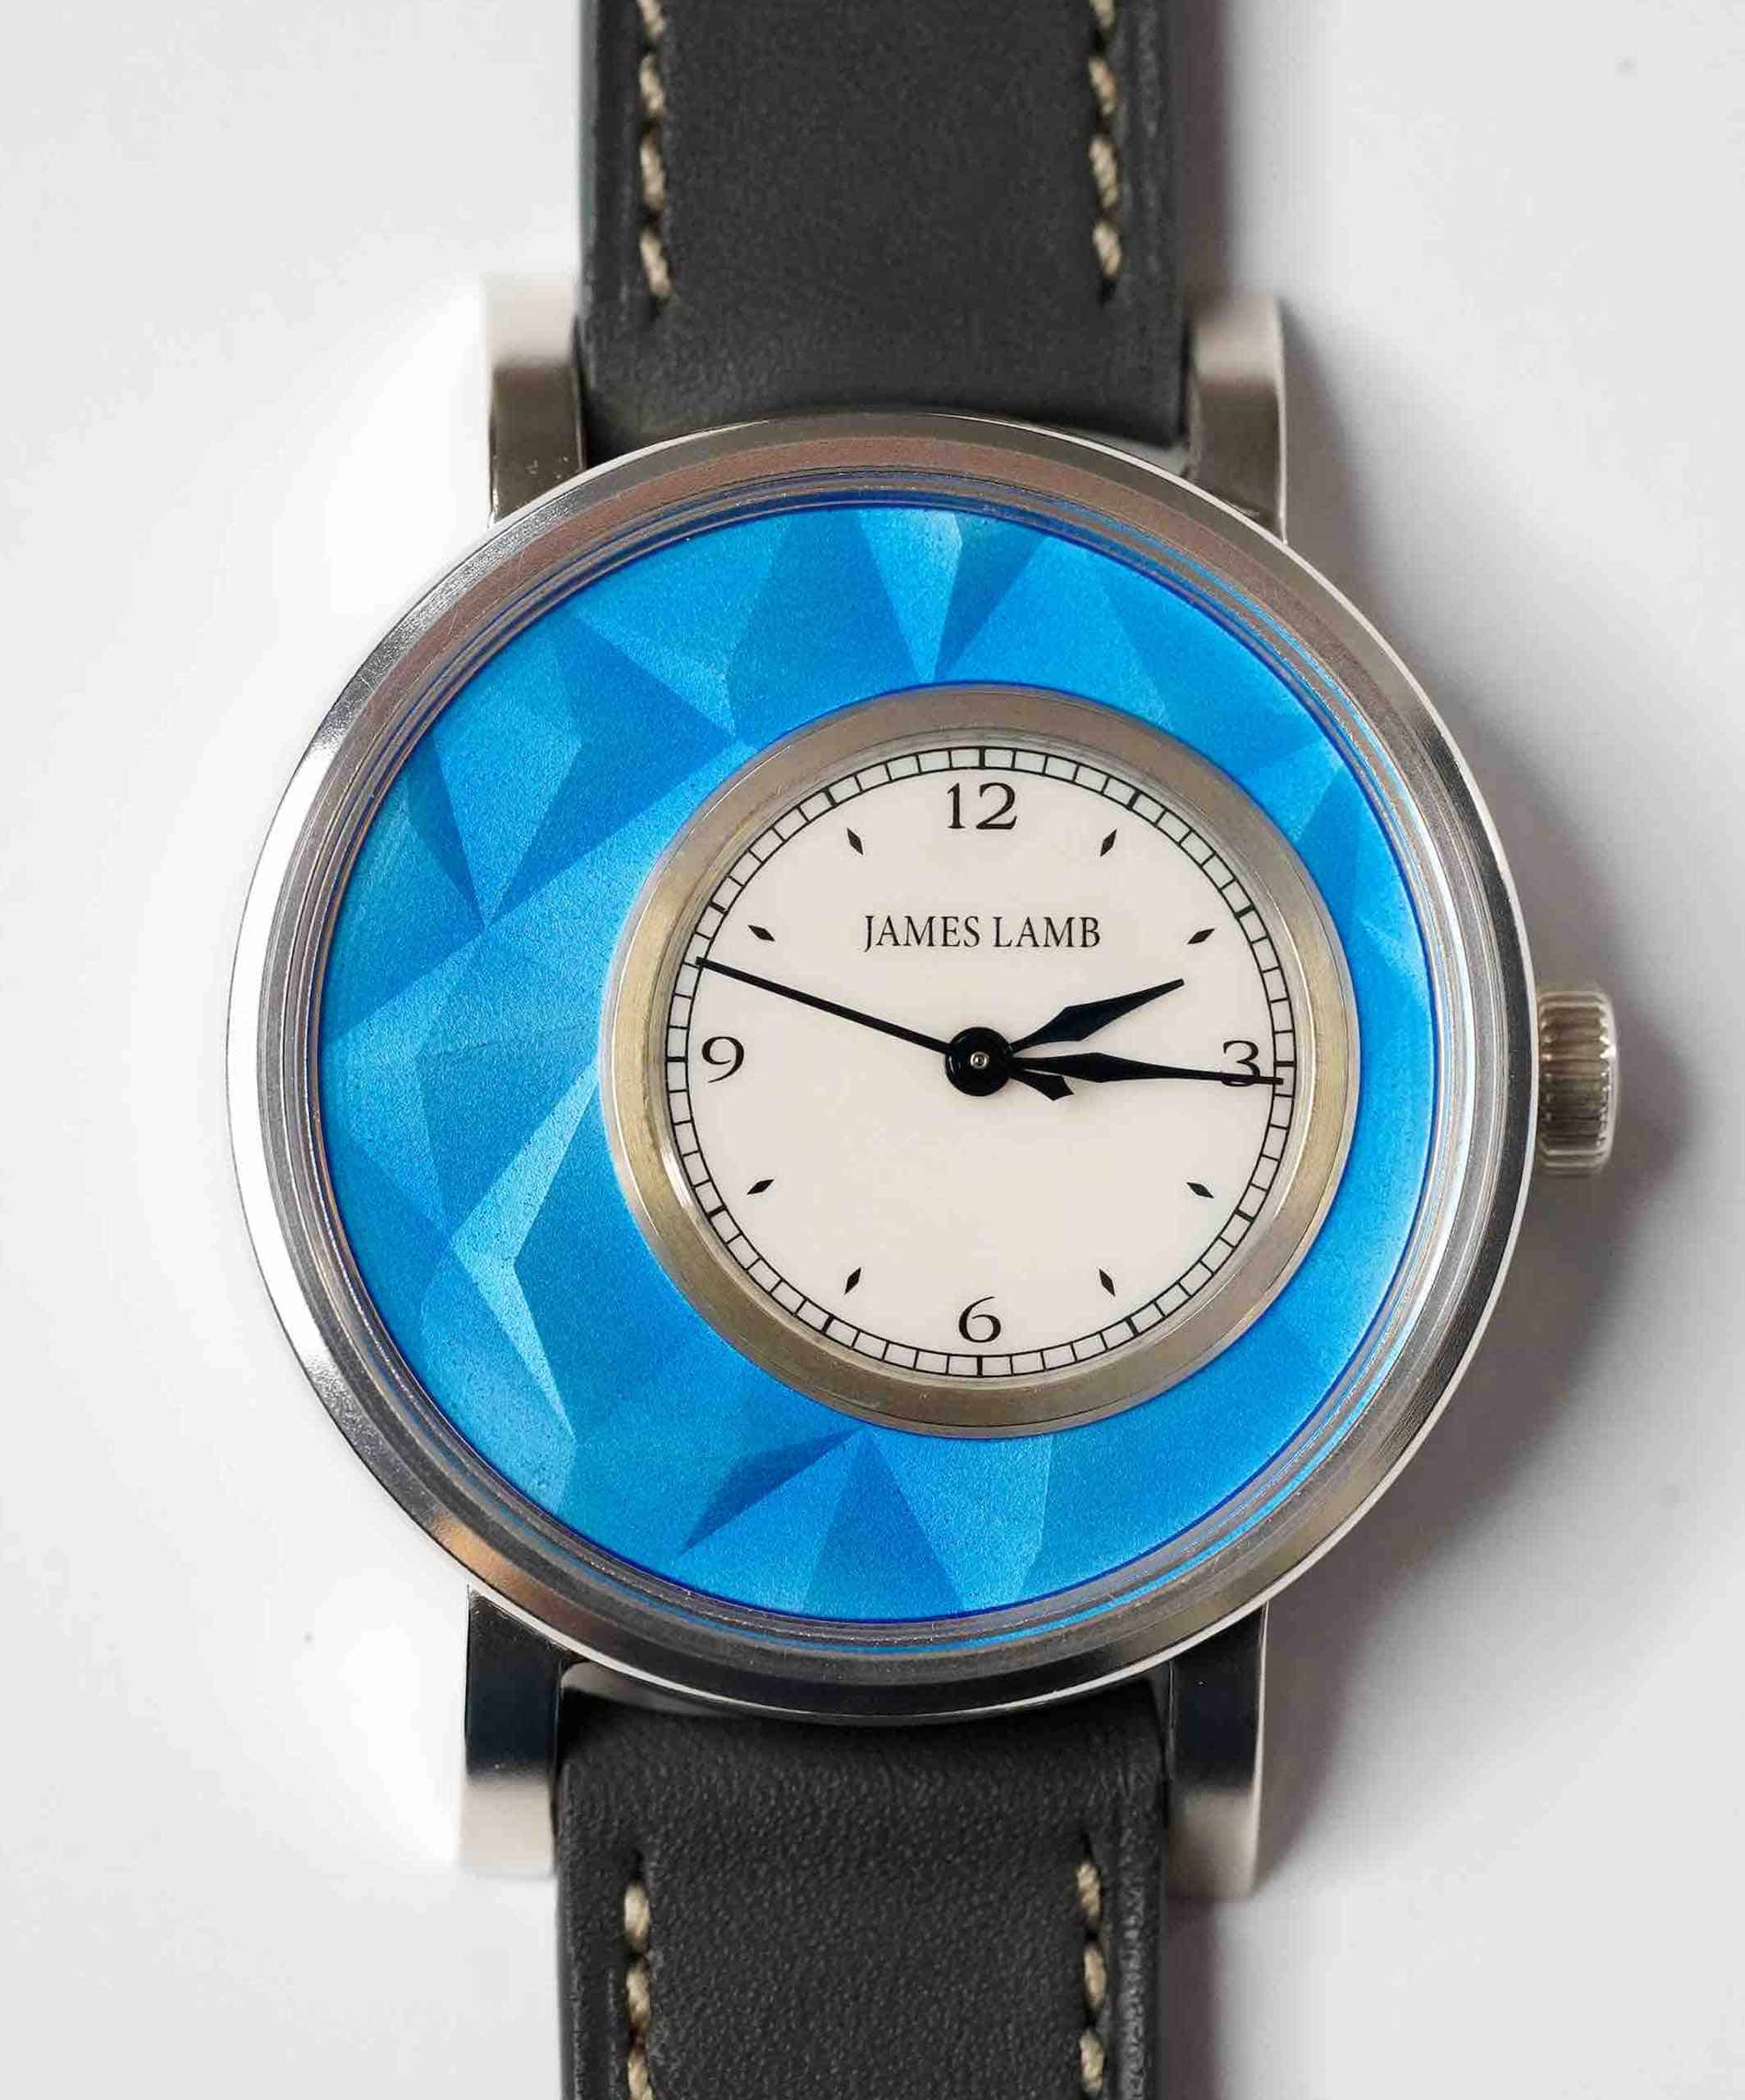 James Lamb Launches a Limited Edition through the Collective Horology Shop